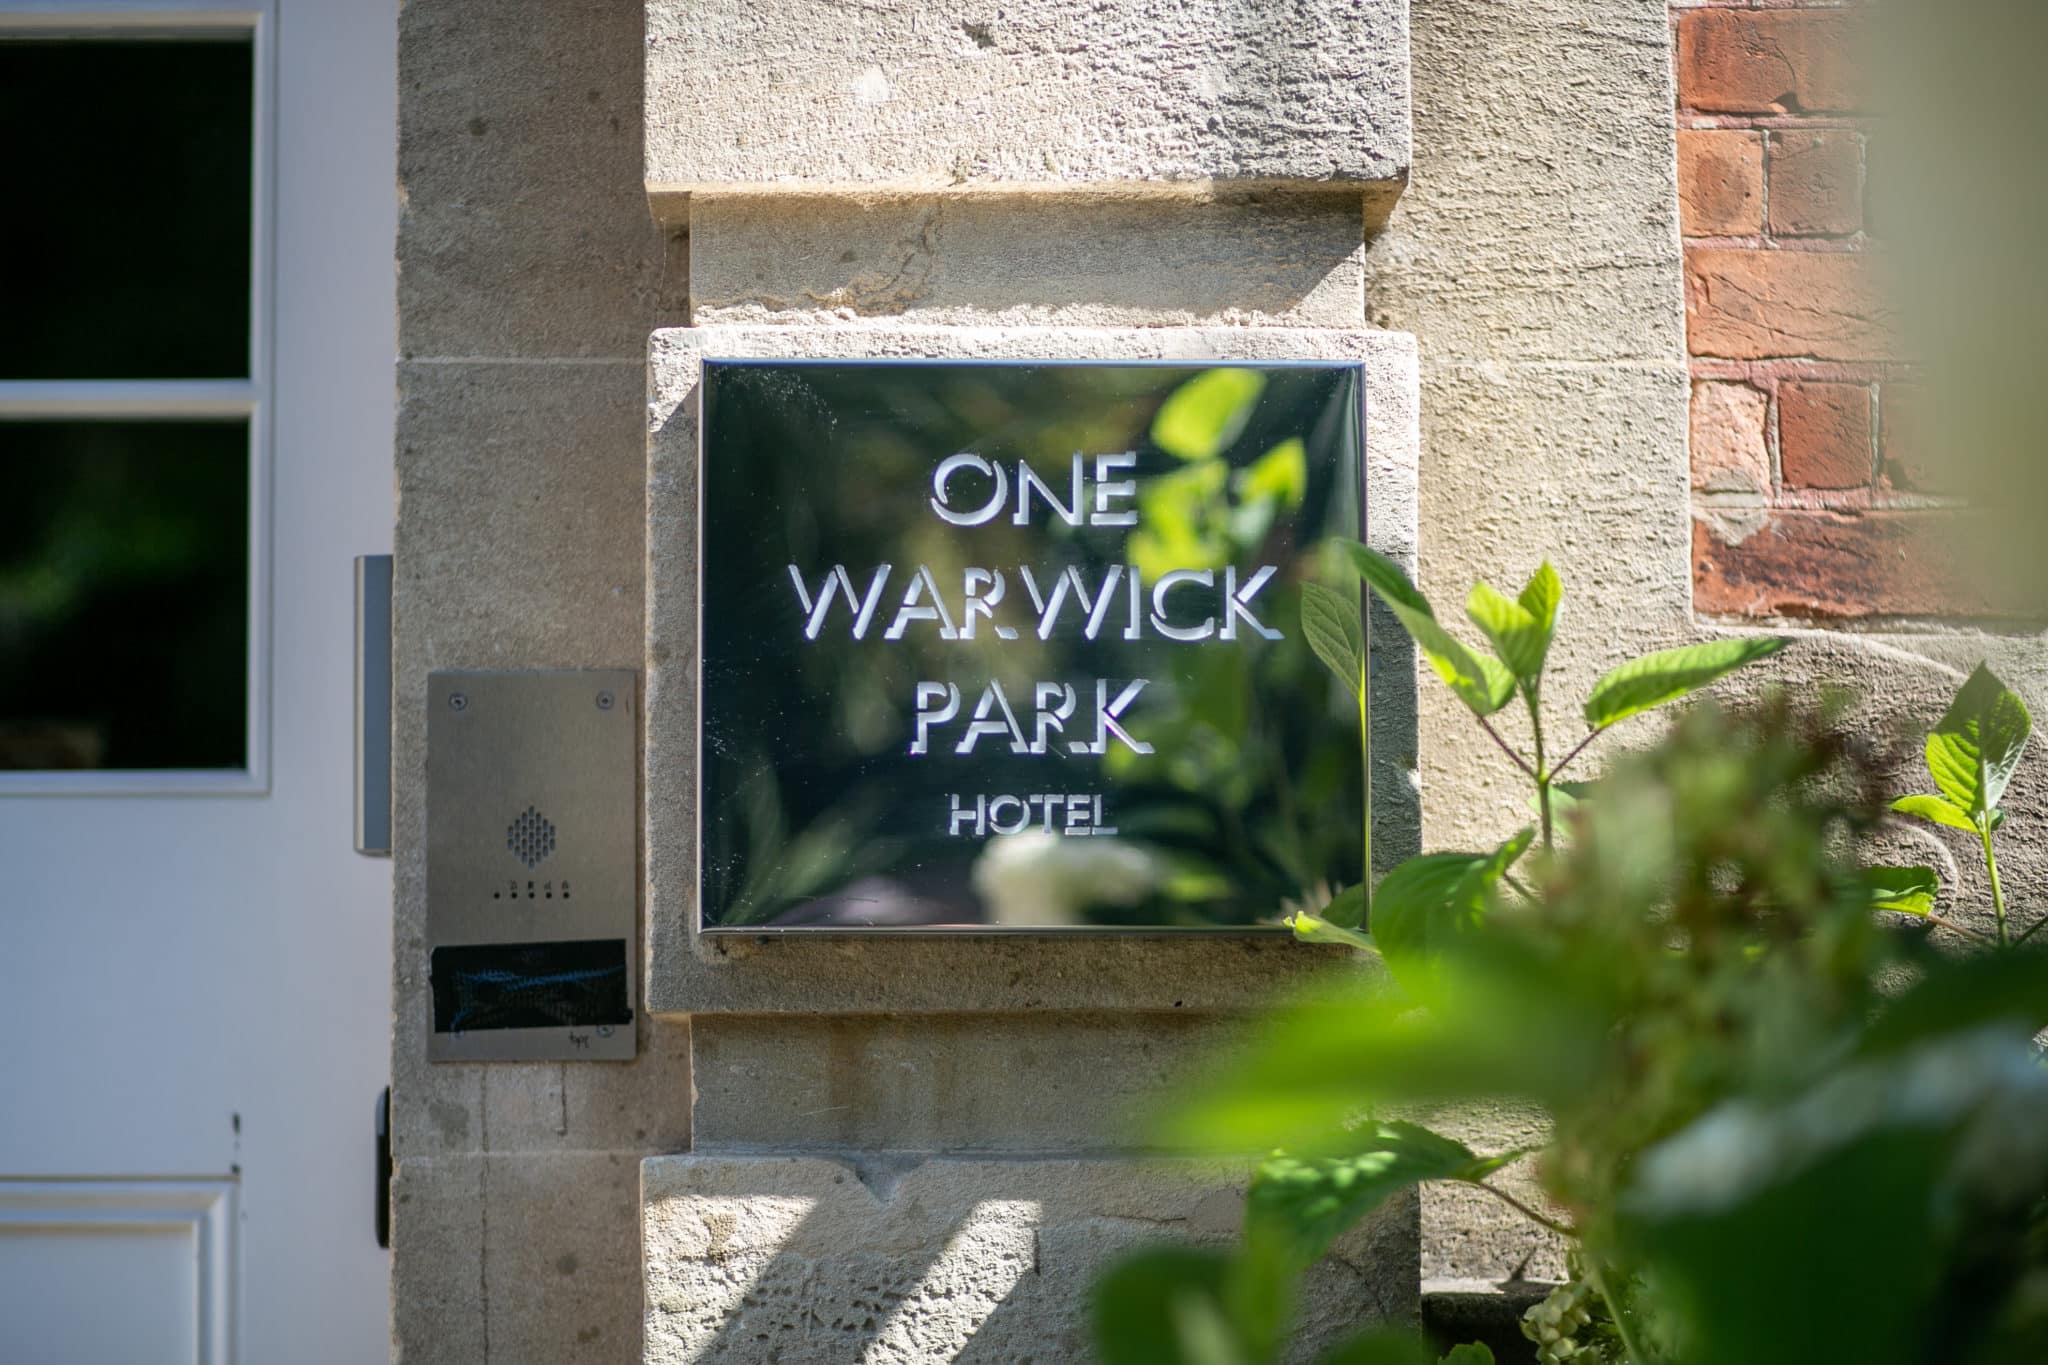 Plaque with "One Warwick Park Hotel" written on it